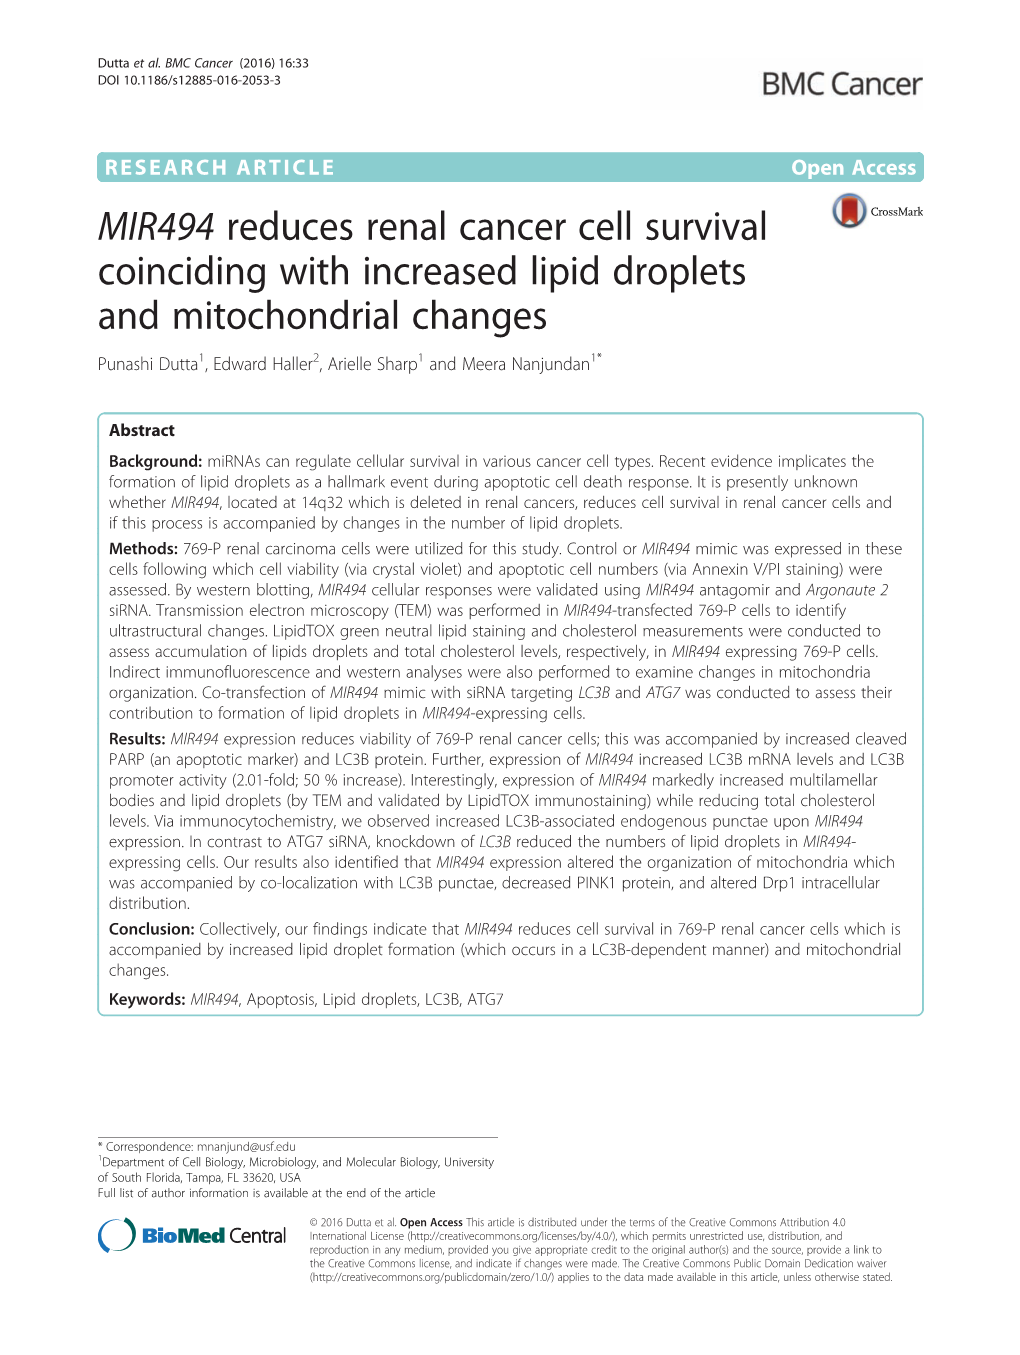 MIR494 Reduces Renal Cancer Cell Survival Coinciding with Increased